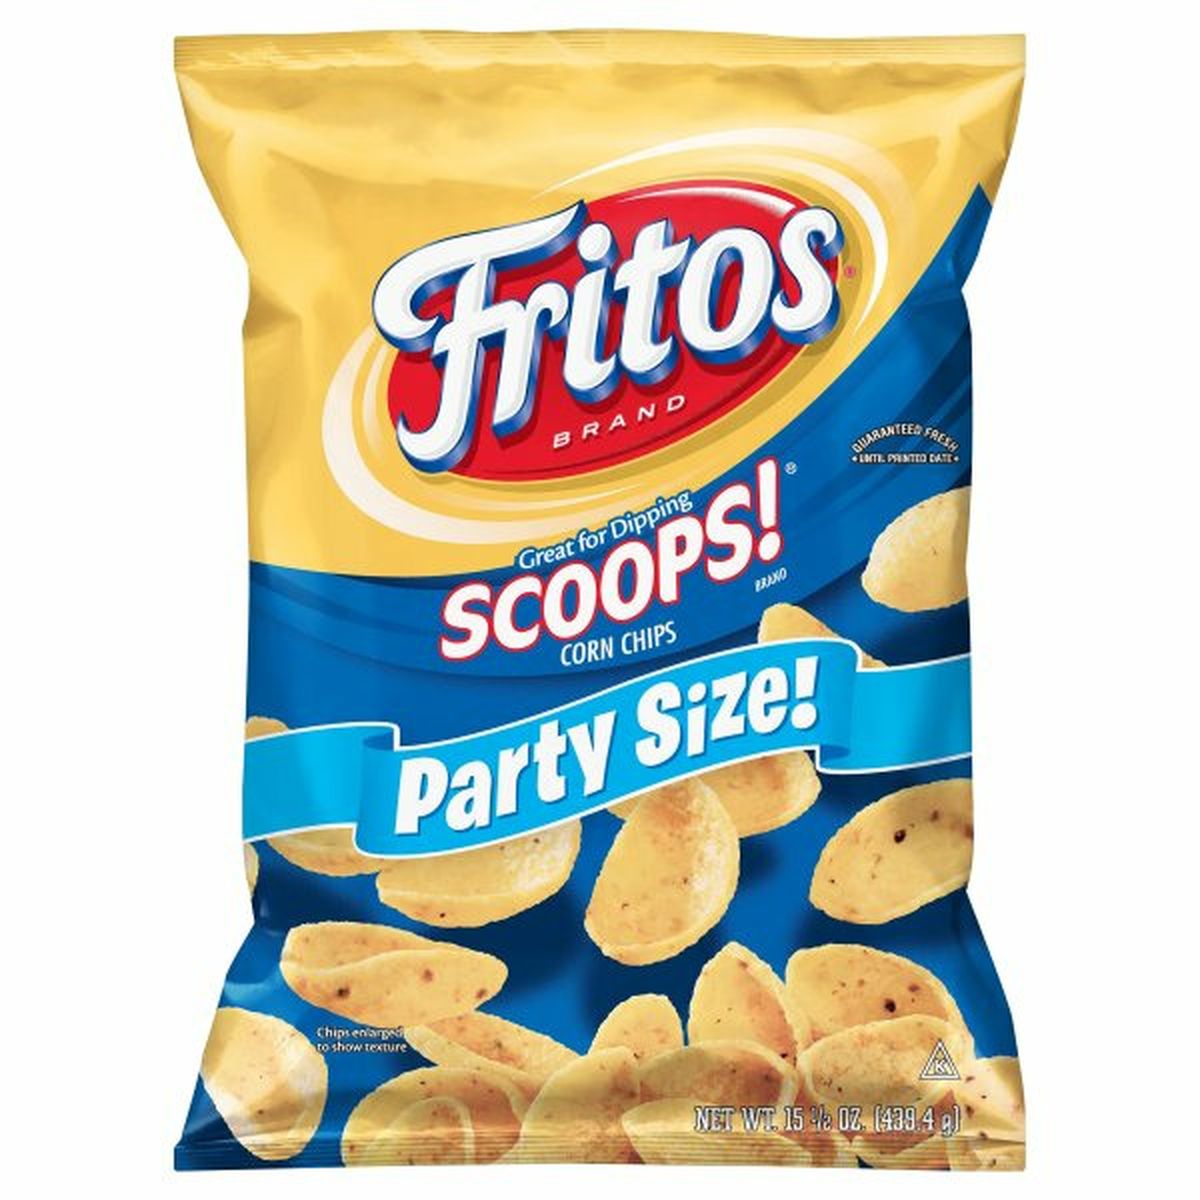 Calories in Fritos Scoops Corn Chips,